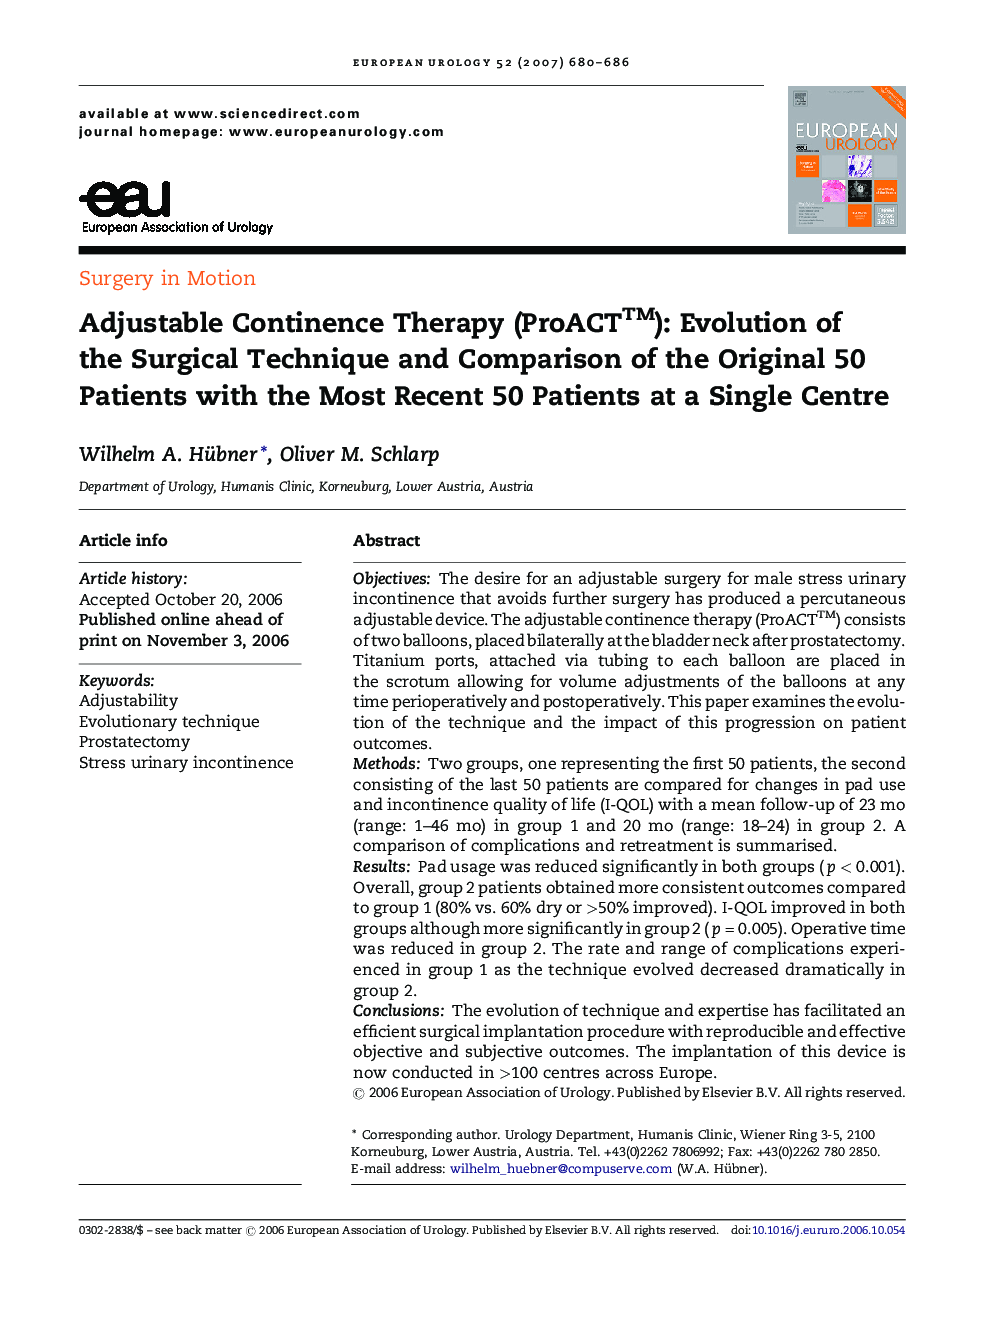 Adjustable Continence Therapy (ProACT™): Evolution of the Surgical Technique and Comparison of the Original 50 Patients with the Most Recent 50 Patients at a Single Centre